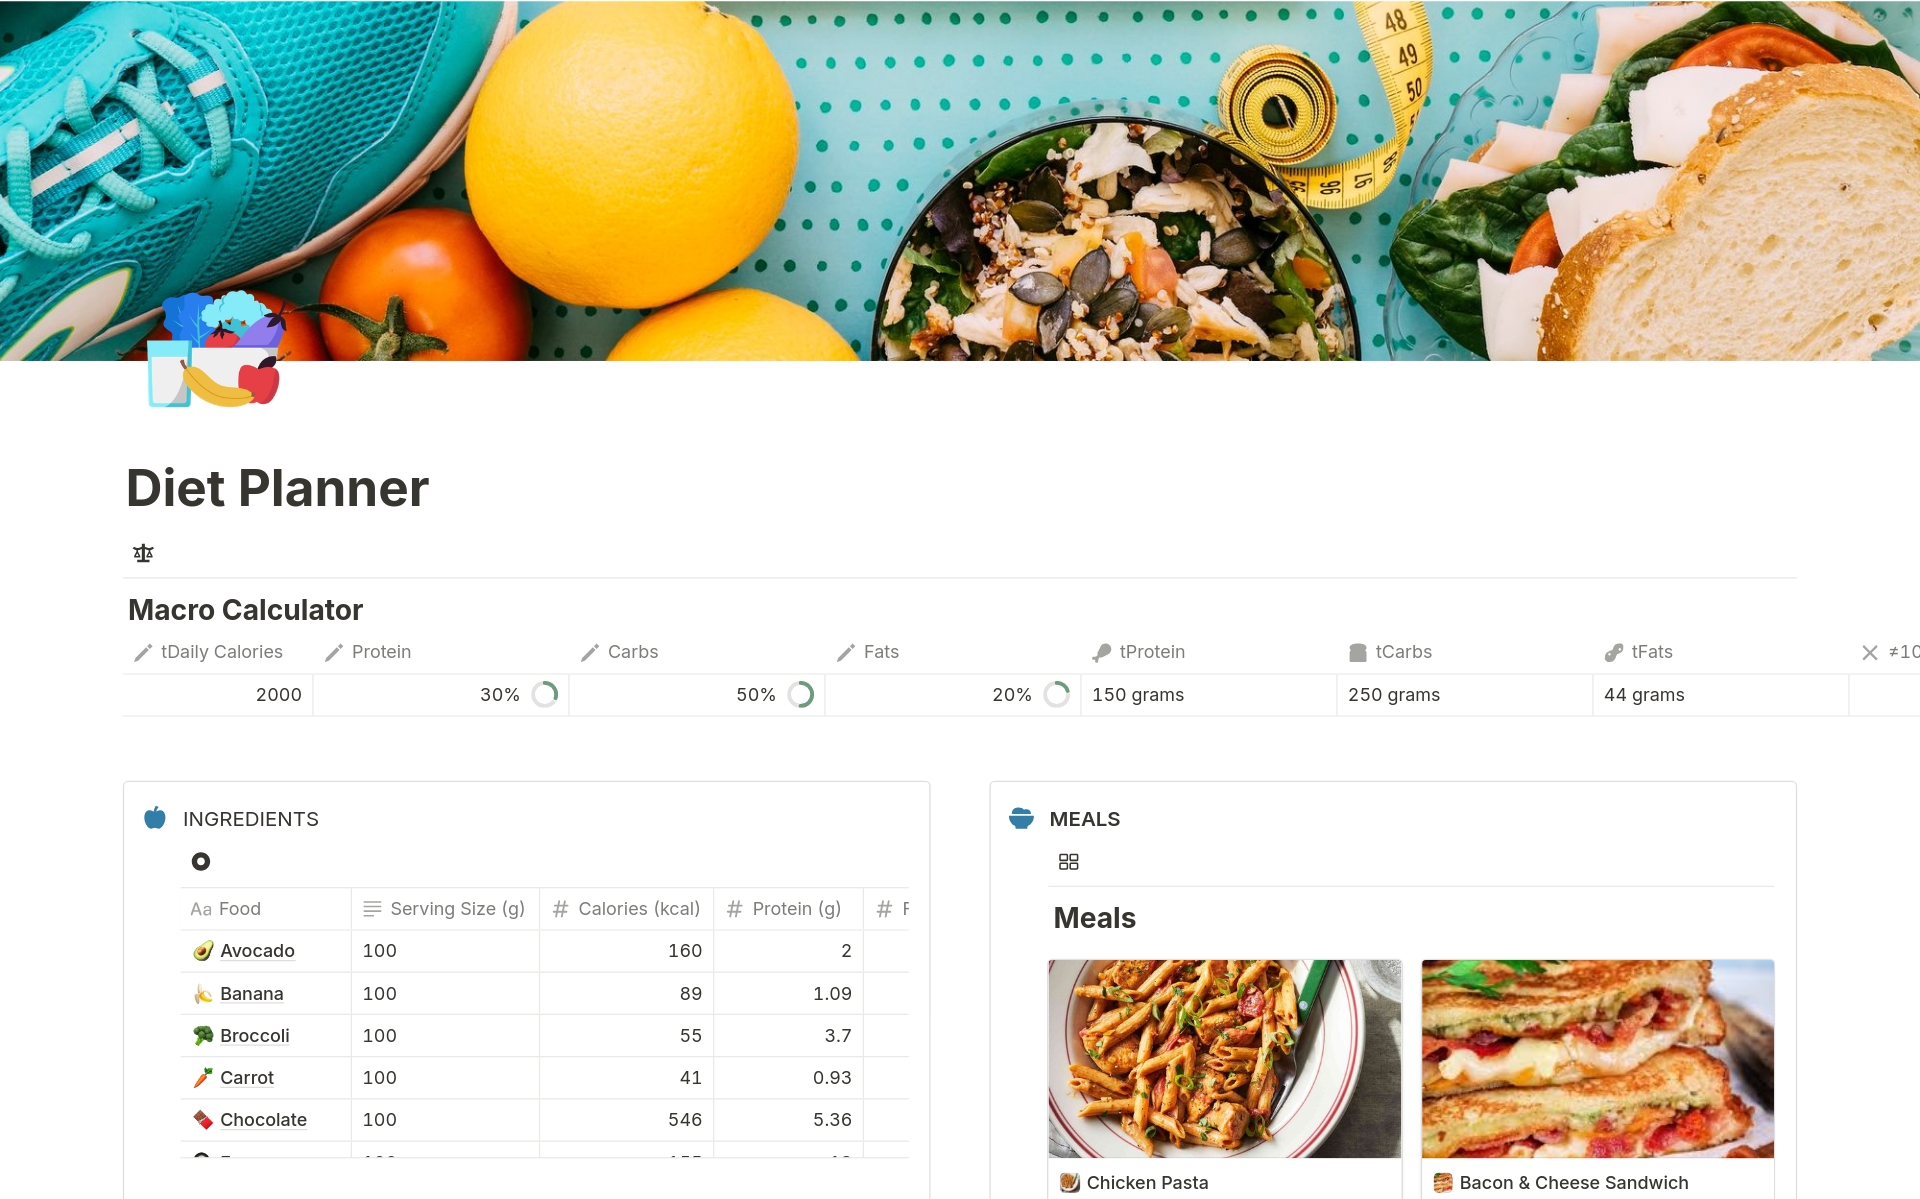 Customize your diet plan effortlessly with our meal planner, tailored to your health goals. Set calorie and macro targets, craft meals accordingly, and track your progress seamlessly. Start your journey to better health today with our free download.